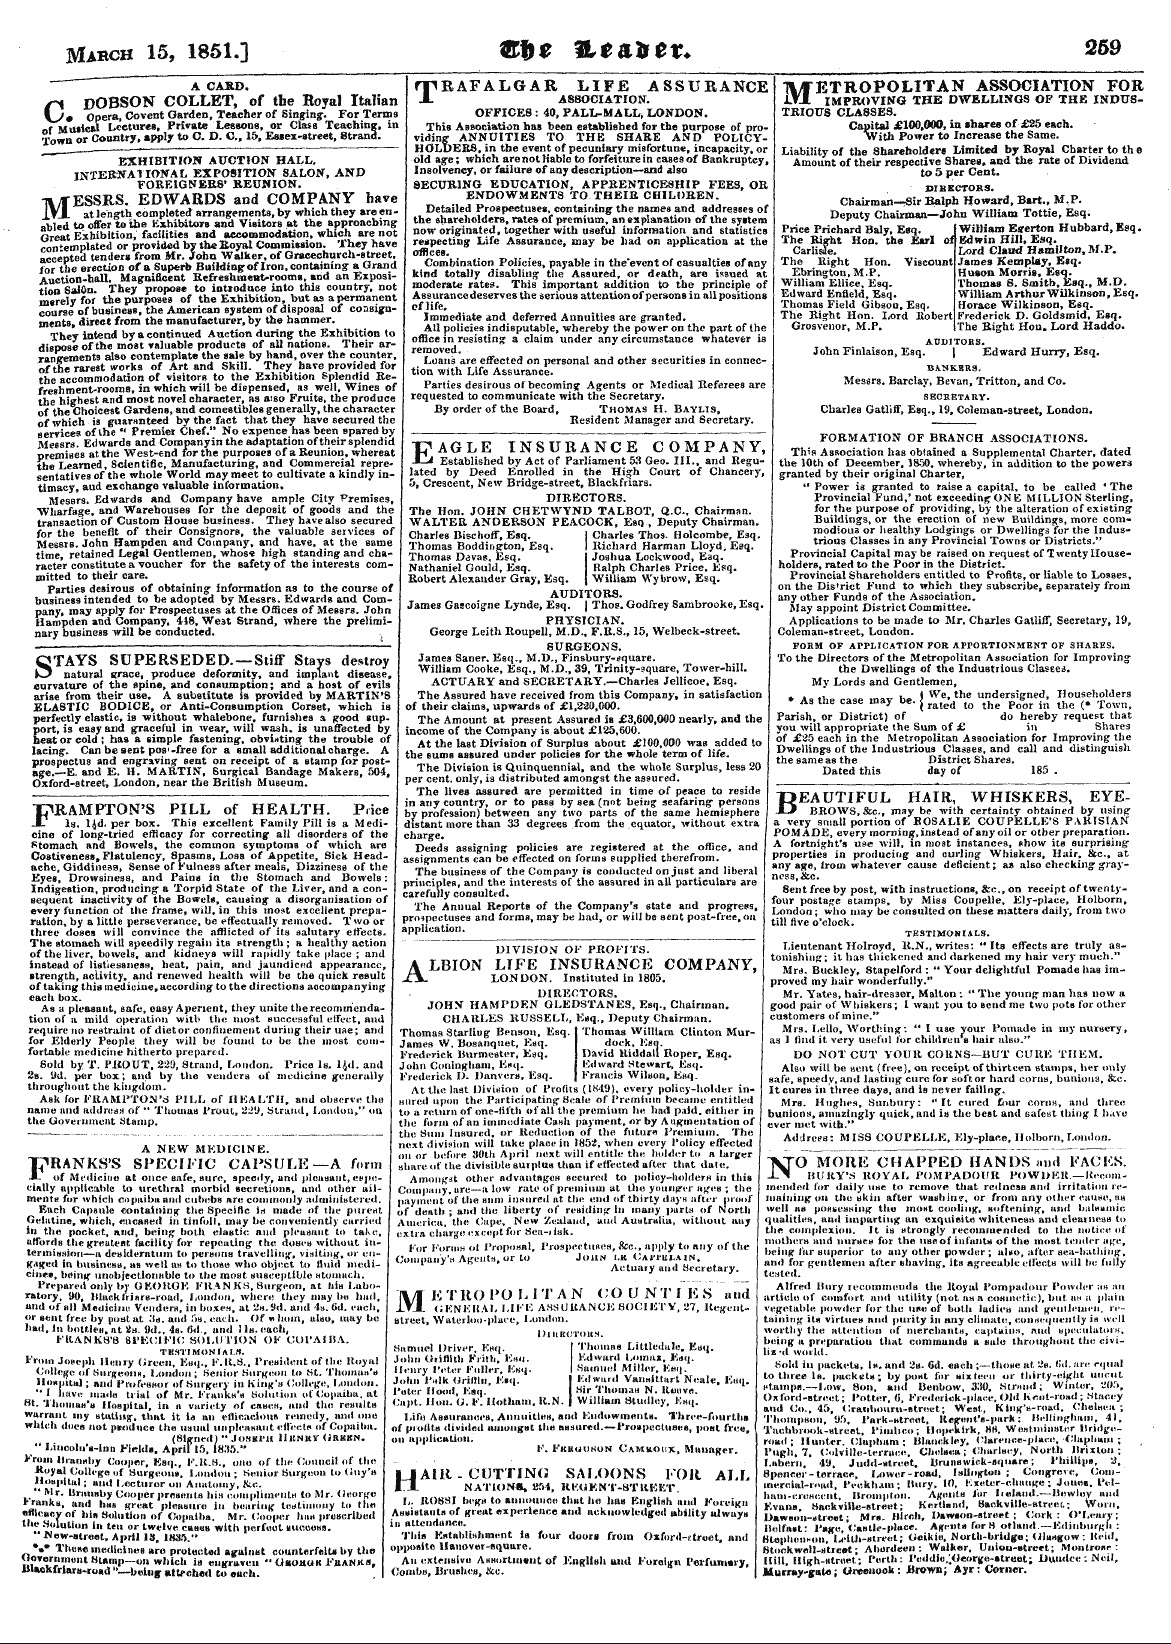 Leader (1850-1860): jS F Y, Country edition - March 15, 1851.] W&Z Ilt&Xltt. 259